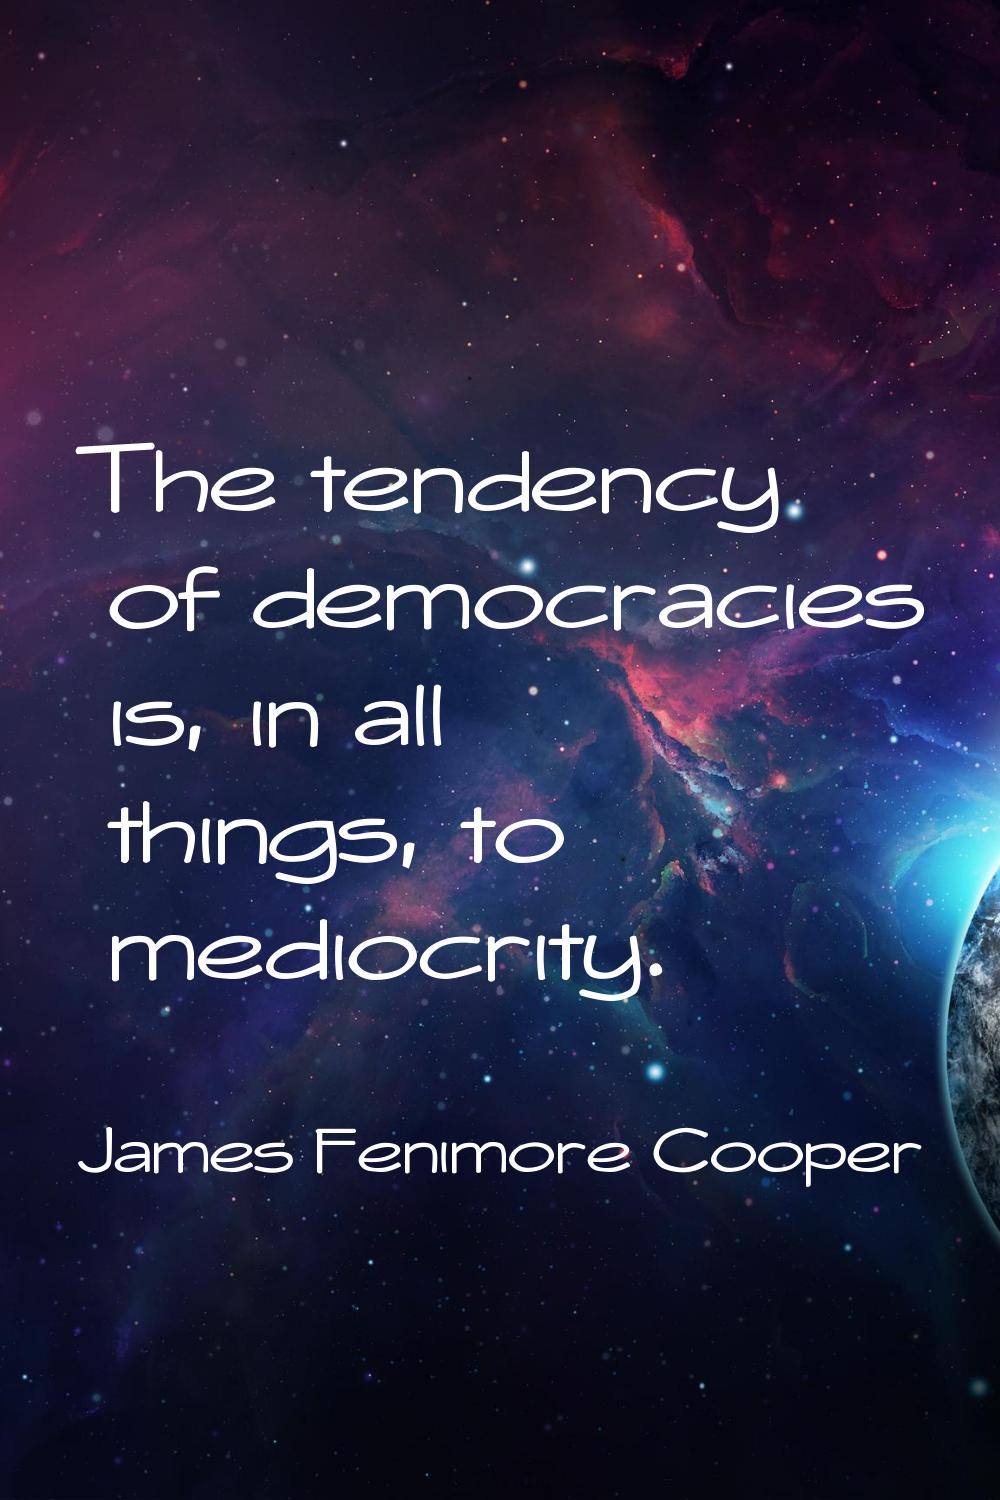 The tendency of democracies is, in all things, to mediocrity.